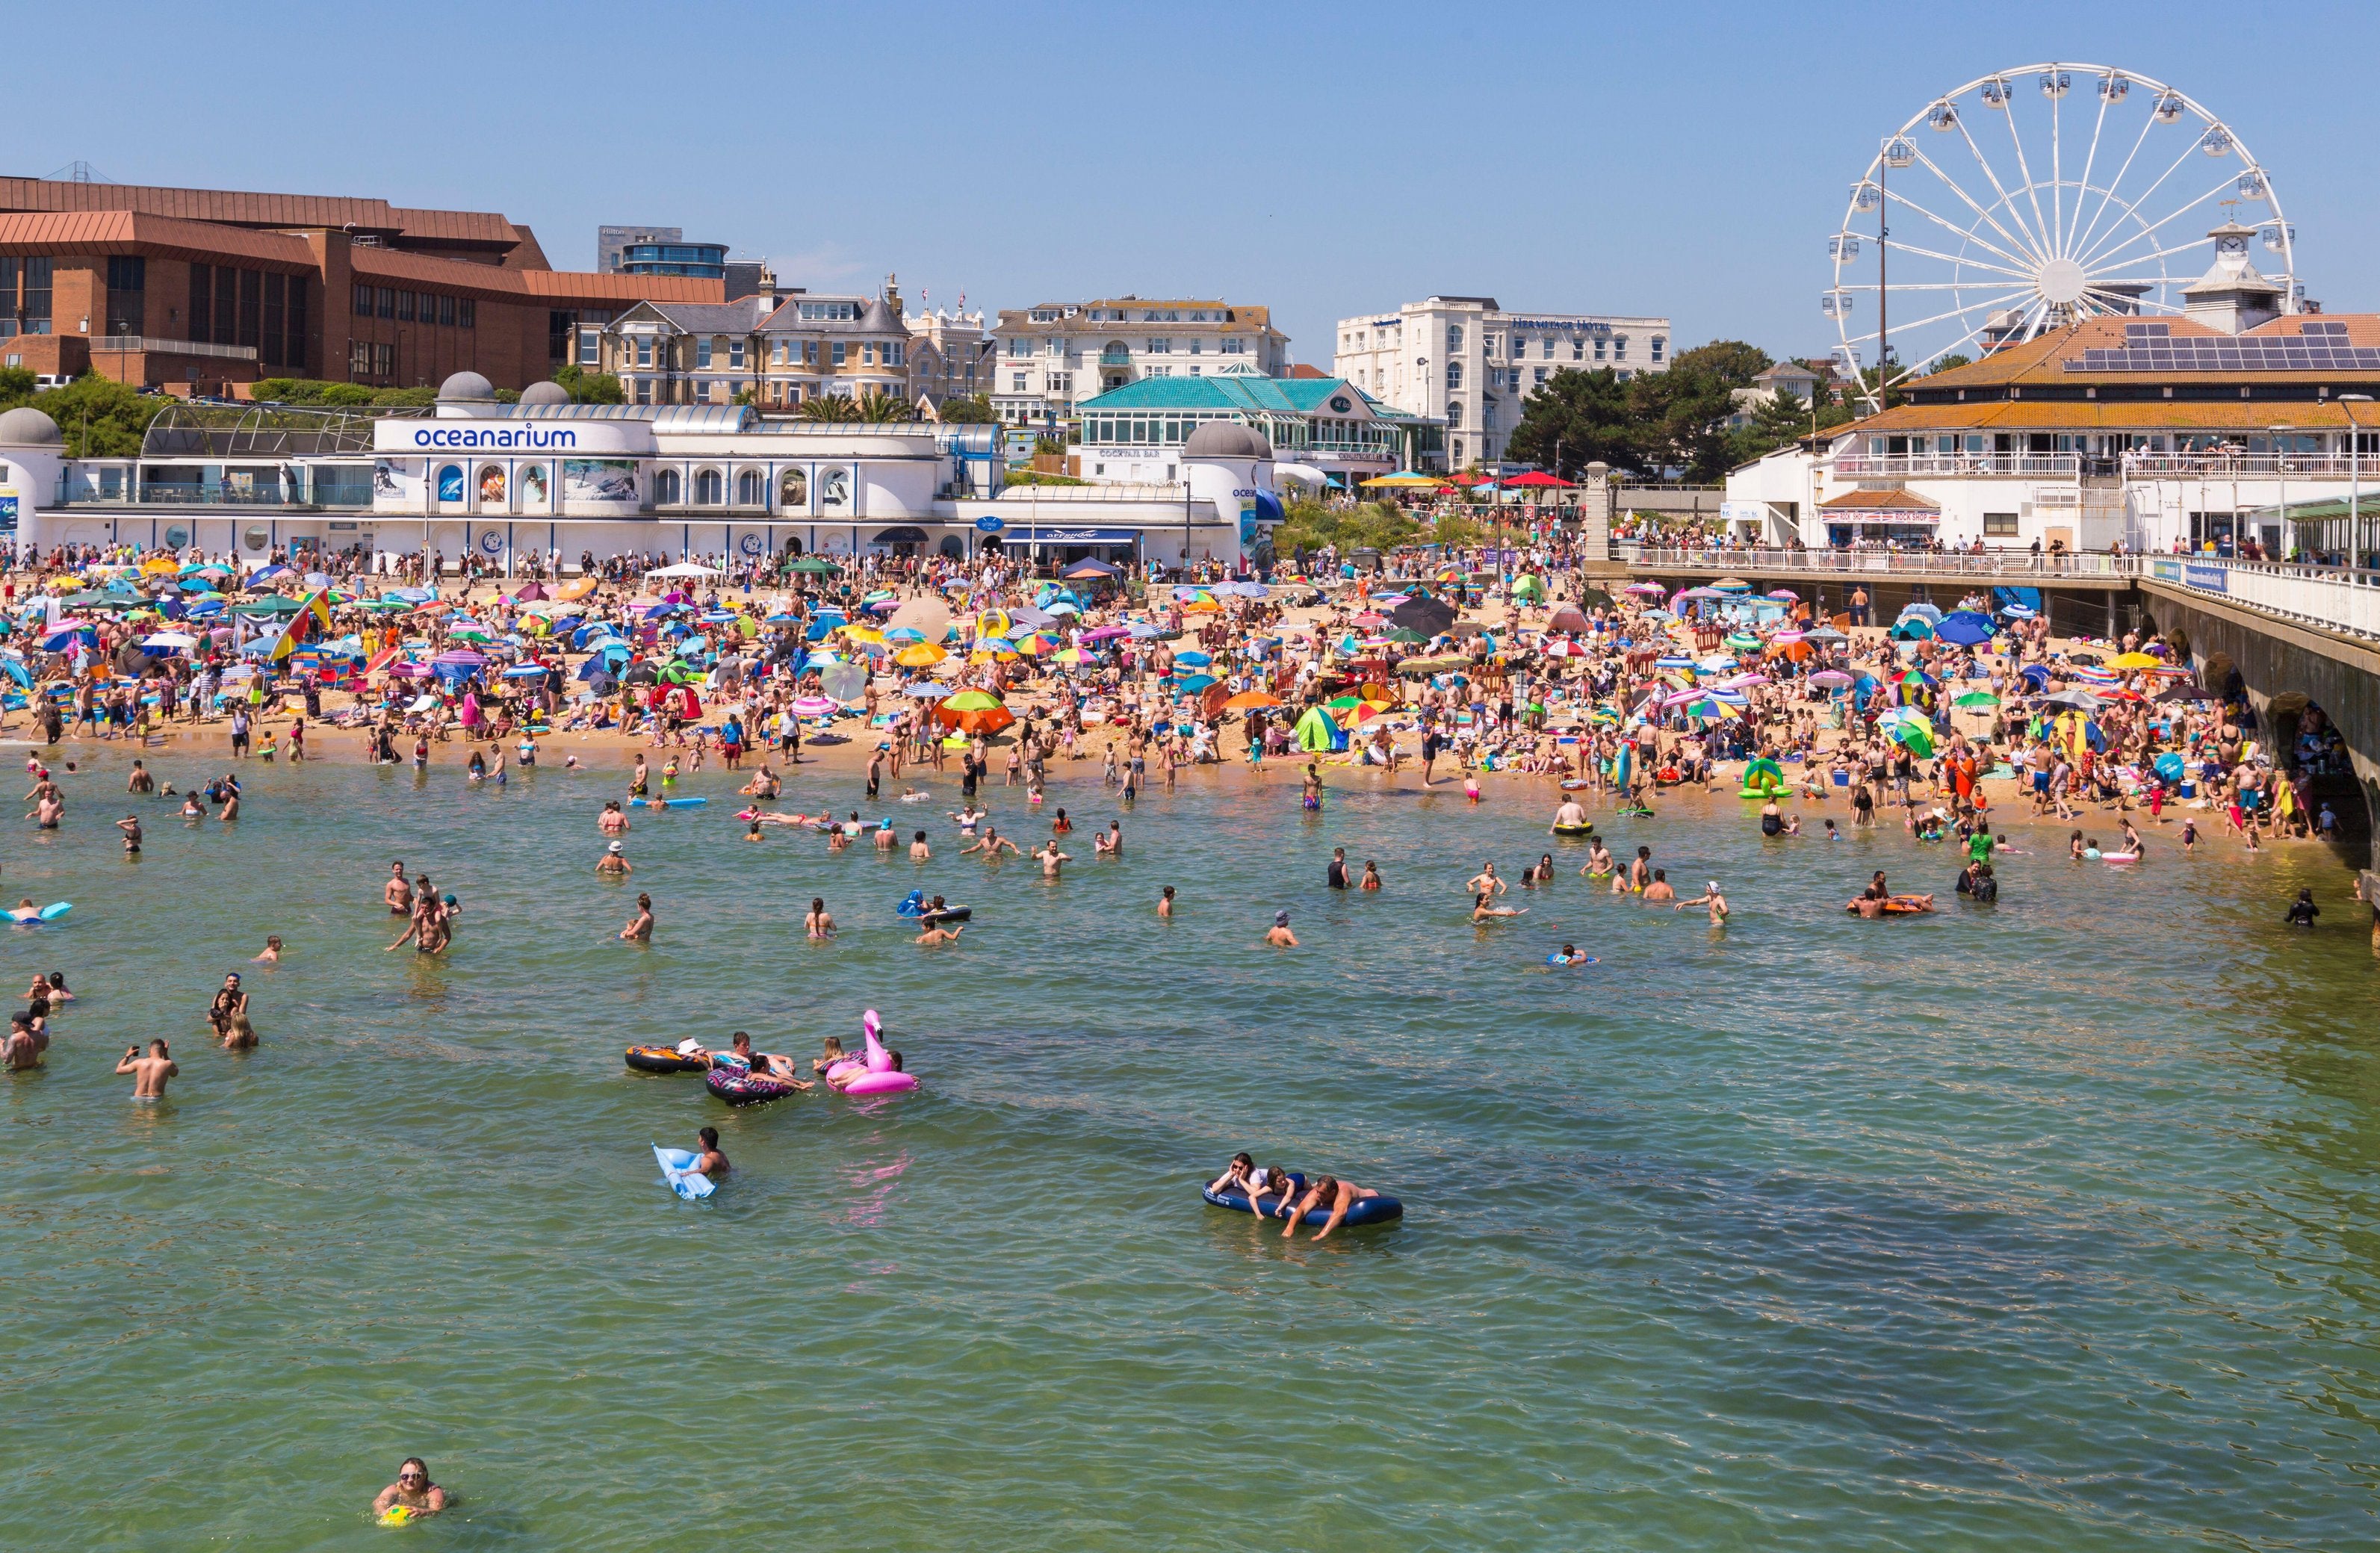 Britons will face more hot weather through July, forecasters say